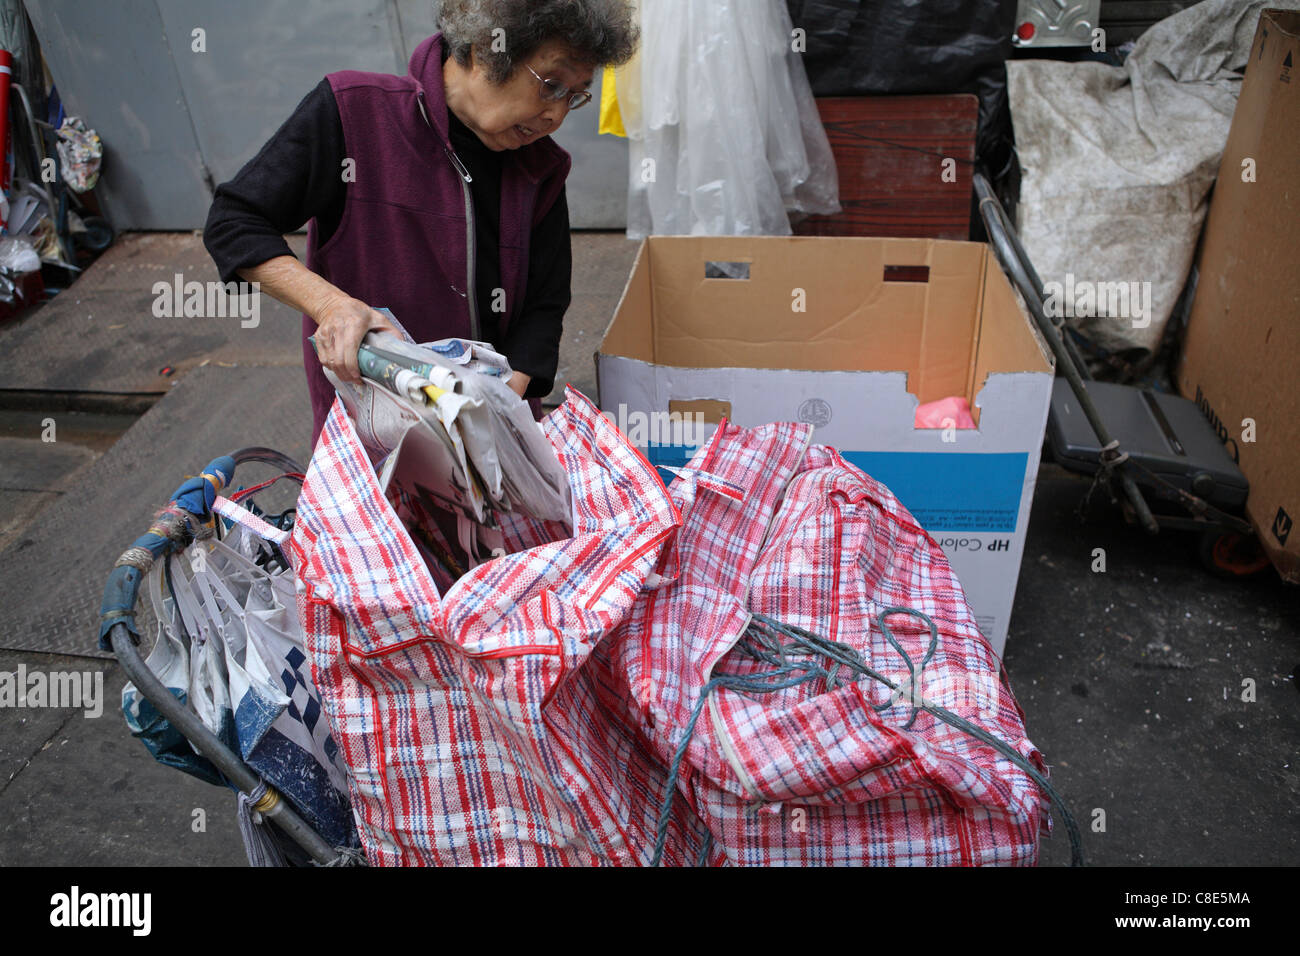 elderly woman taking paper & card to sell at a recycling depot in Hong Kong China, Asia Stock Photo